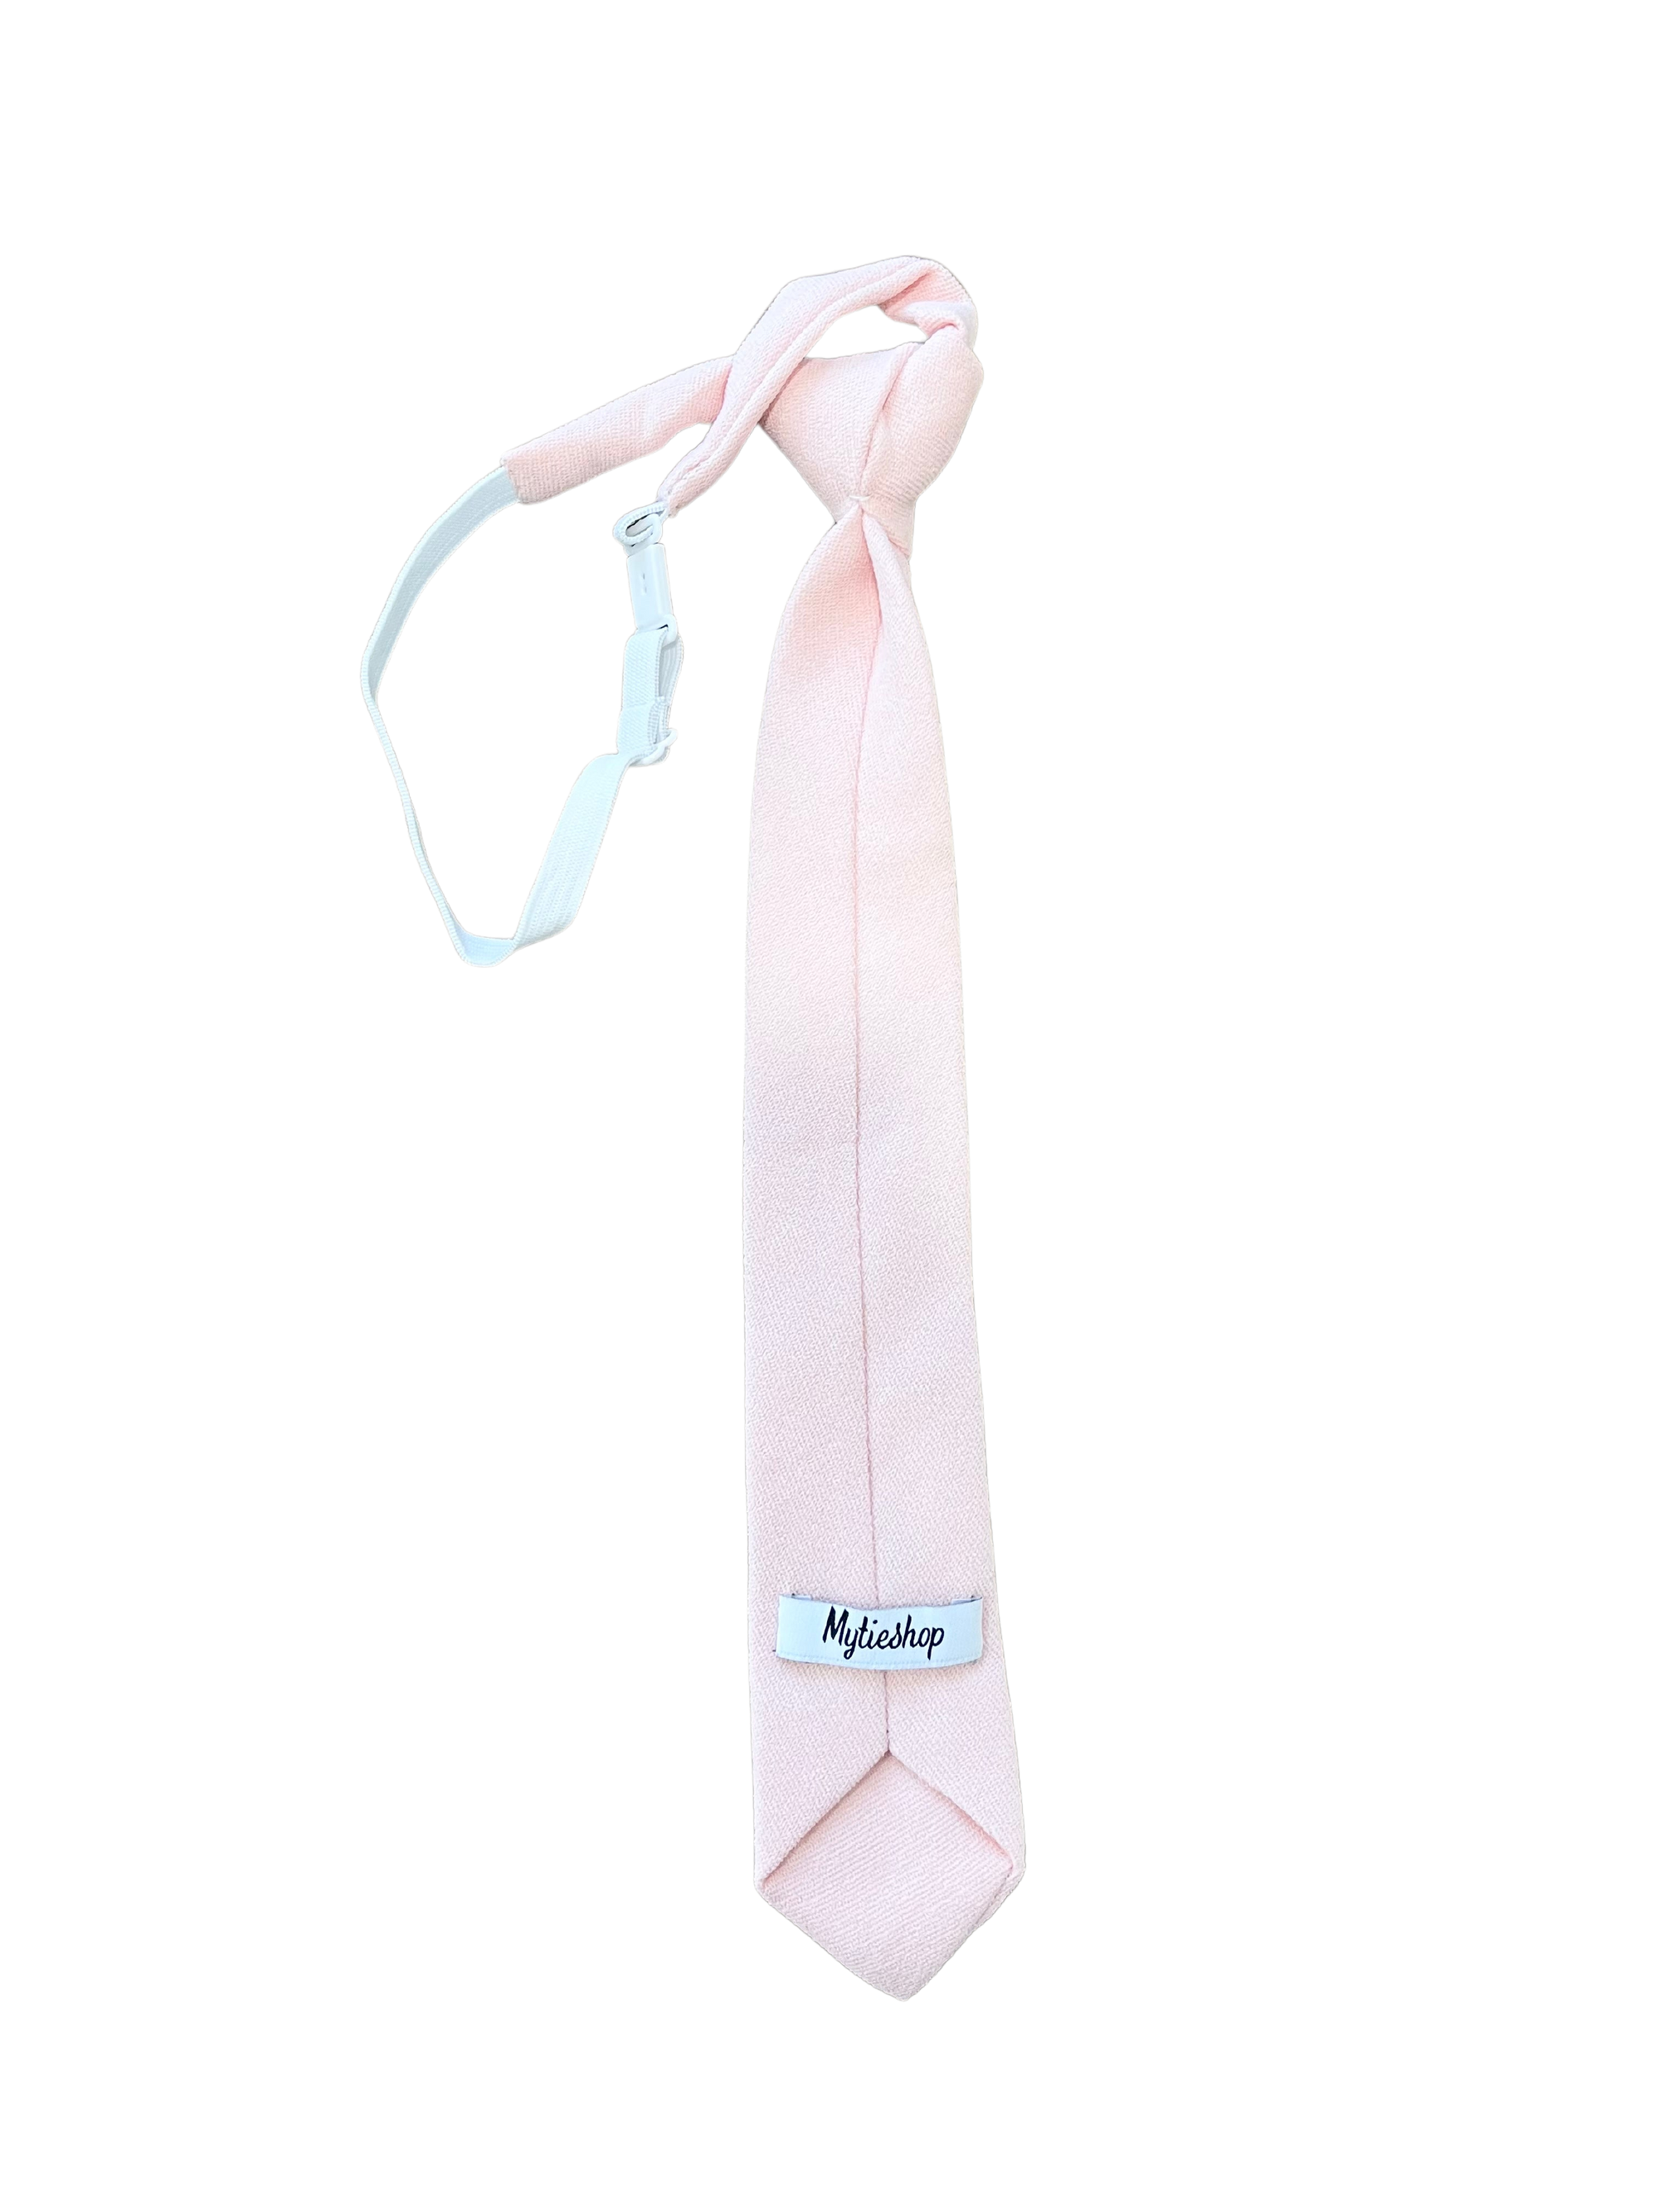 Pink Tie For Kids (Strap) CORA Skinny Fit-Pink Tie For Kids Material: Sued Color: Pink Approx Size: Max width: 6.5 cm / 2.36 inches Length: 37 Cm / 14.56 Inches Have a little one that you need to dress up for a wedding or other formal event? spoil them rotten with this CORA Pink Kids and Toddlers Clip On Tie. This tie is absolutely darling, and will have them looking their best. The clip on design makes it easy to put on and take off, so even the squirmiest of kids can wear it with ease. You'll 